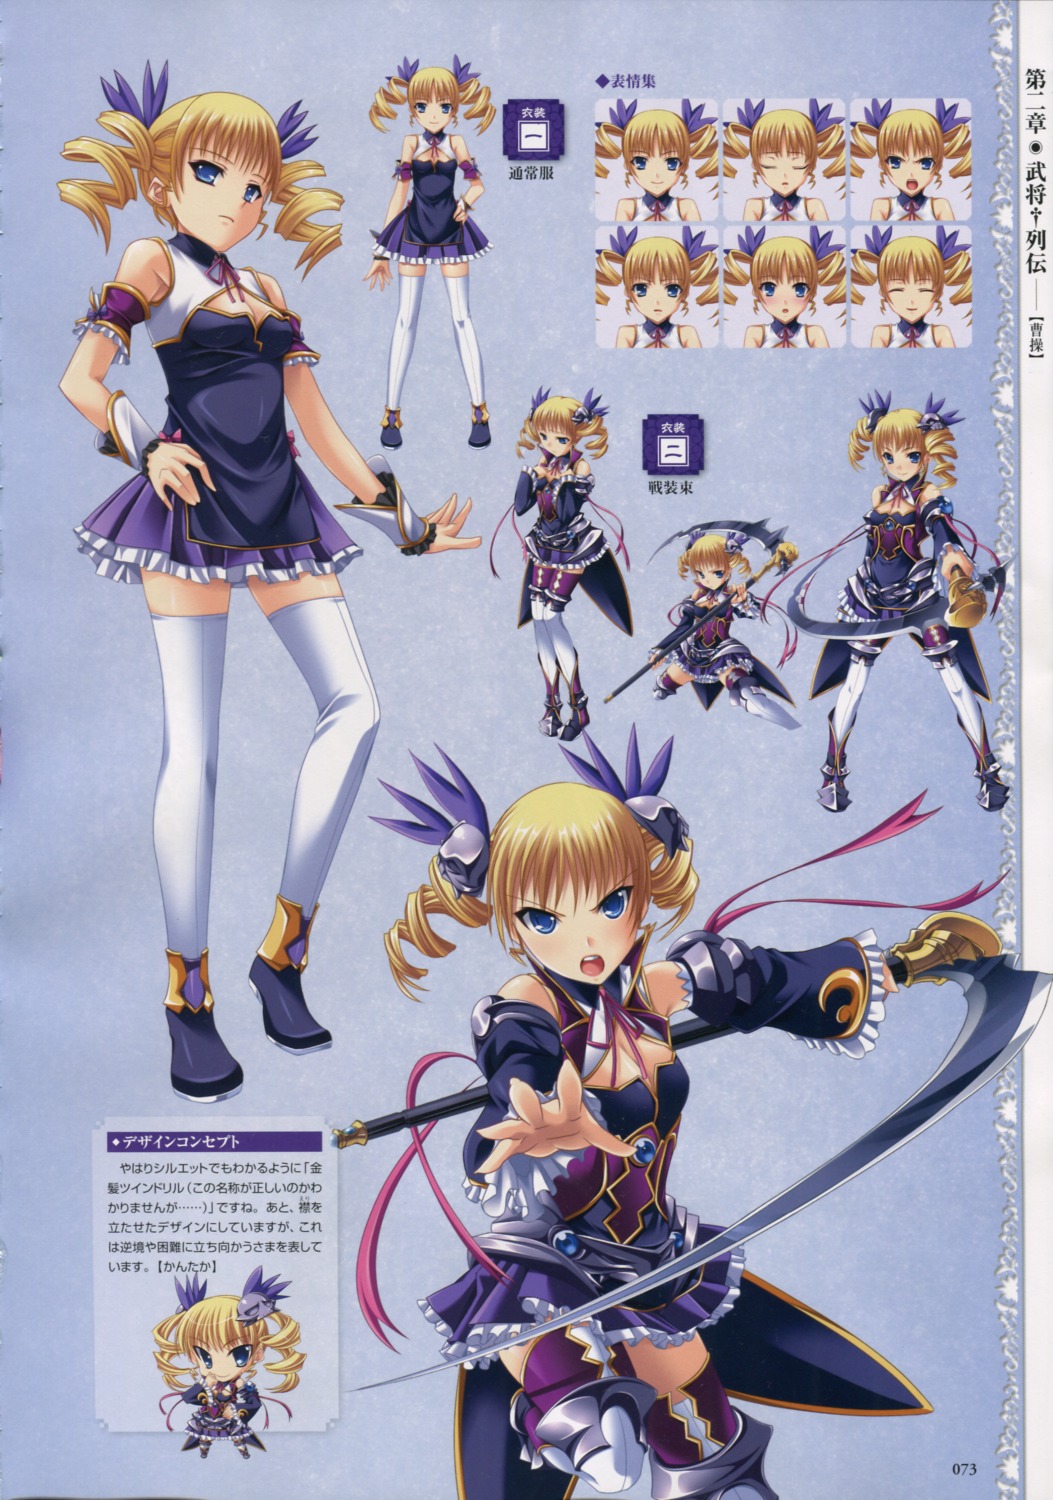 armor baseson character_design chibi expression koihime_musou sousou thighhighs weapon